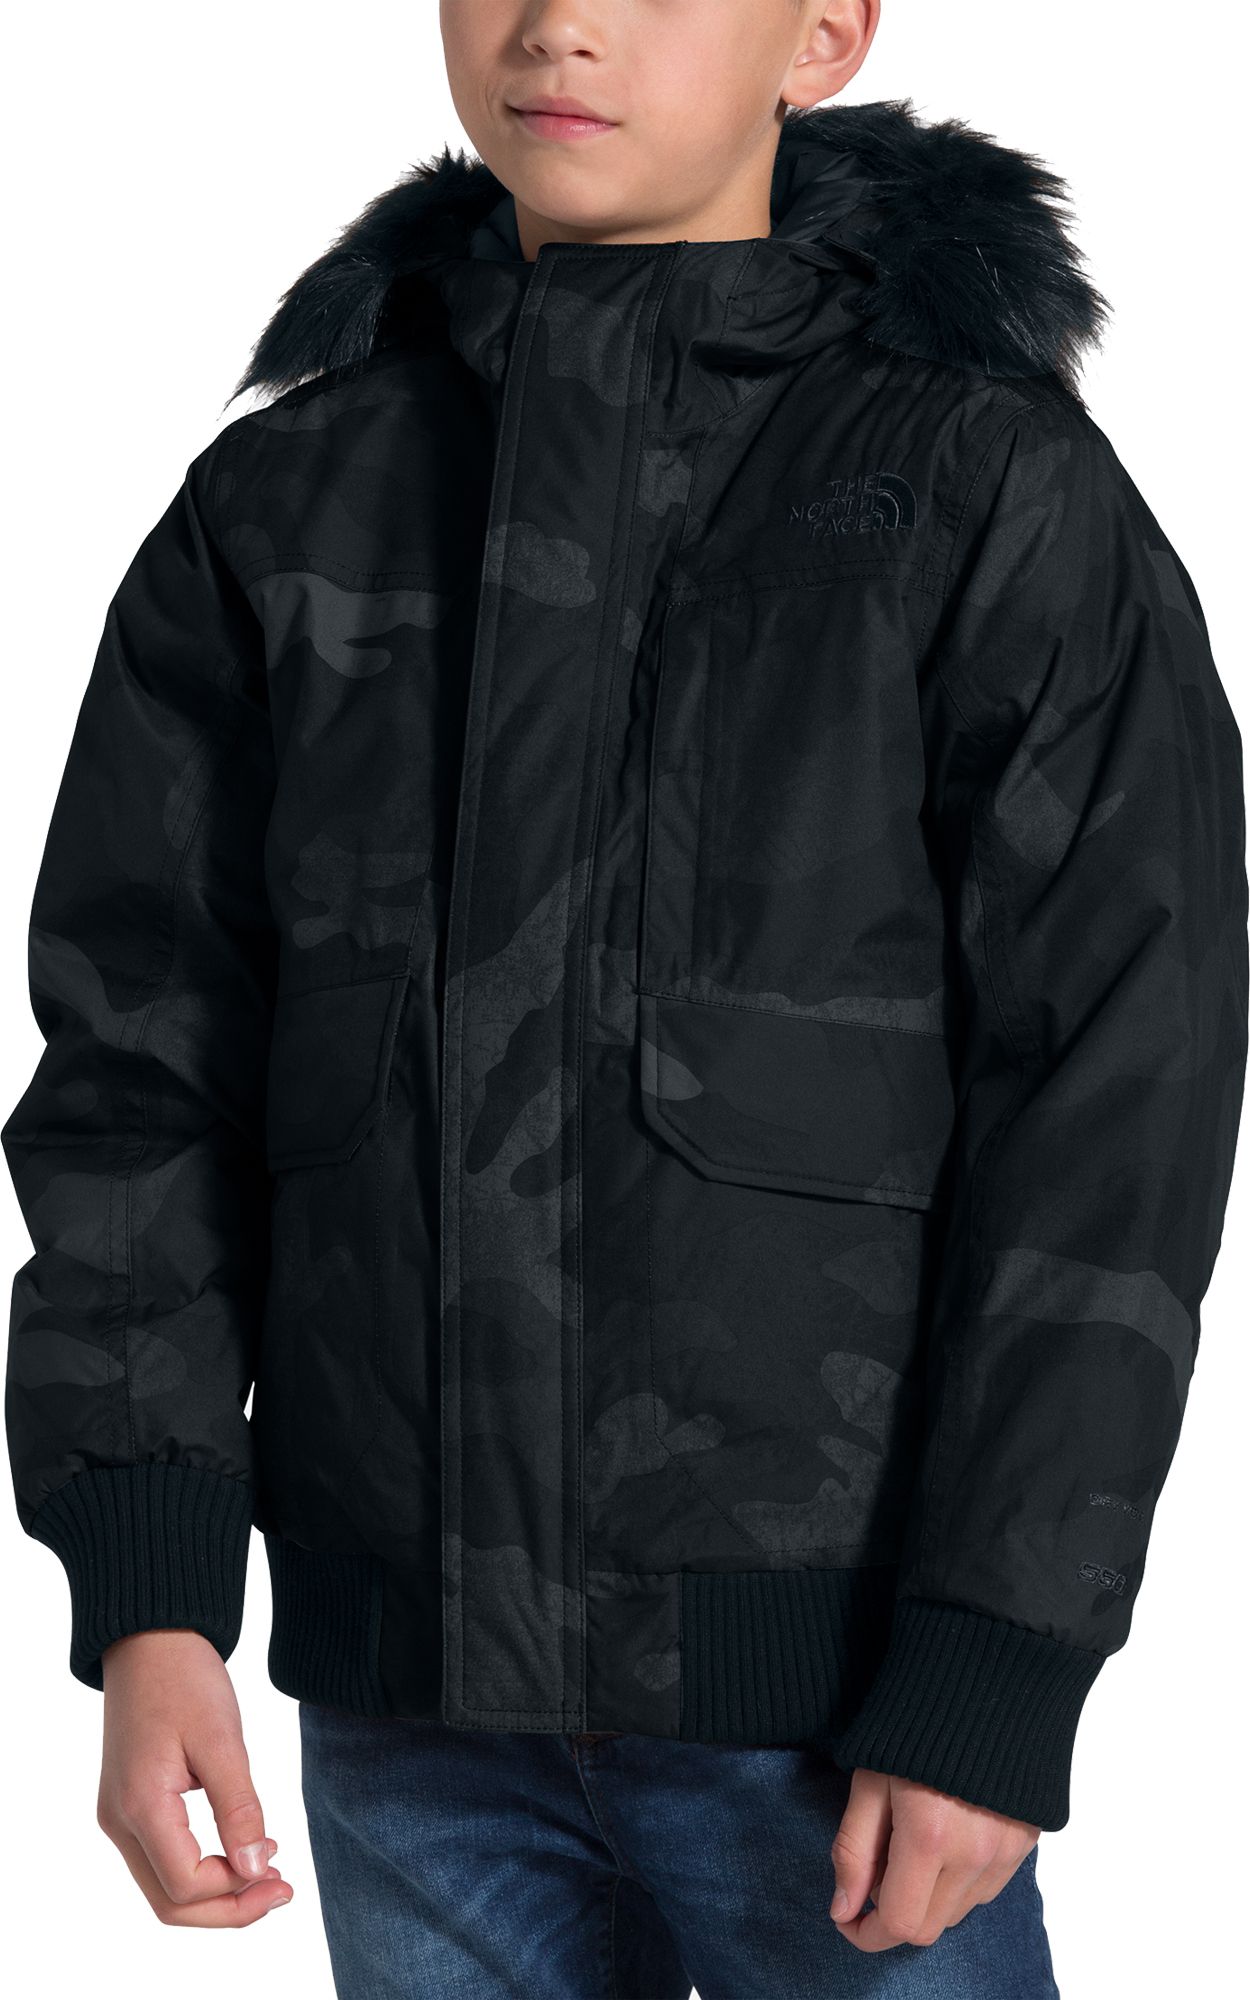 North Face Gotham Down Best Sale, 56% OFF | empow-her.com